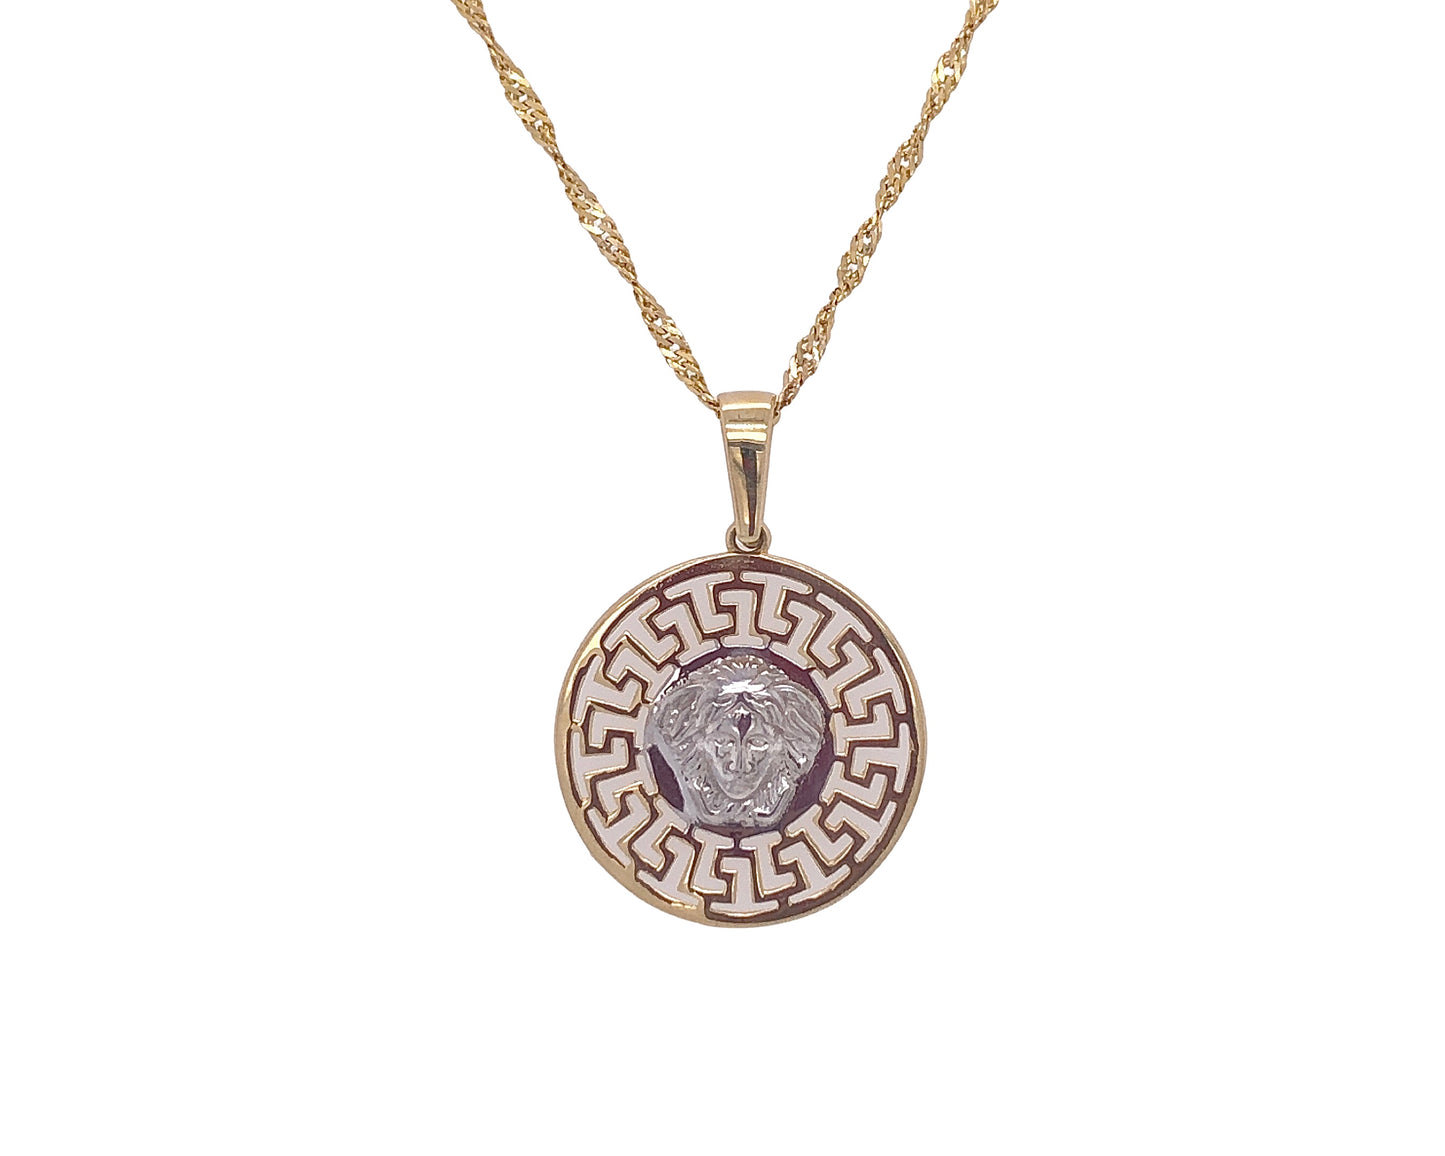 10K Yellow Gold Circle Versace-style Pendant With Chain